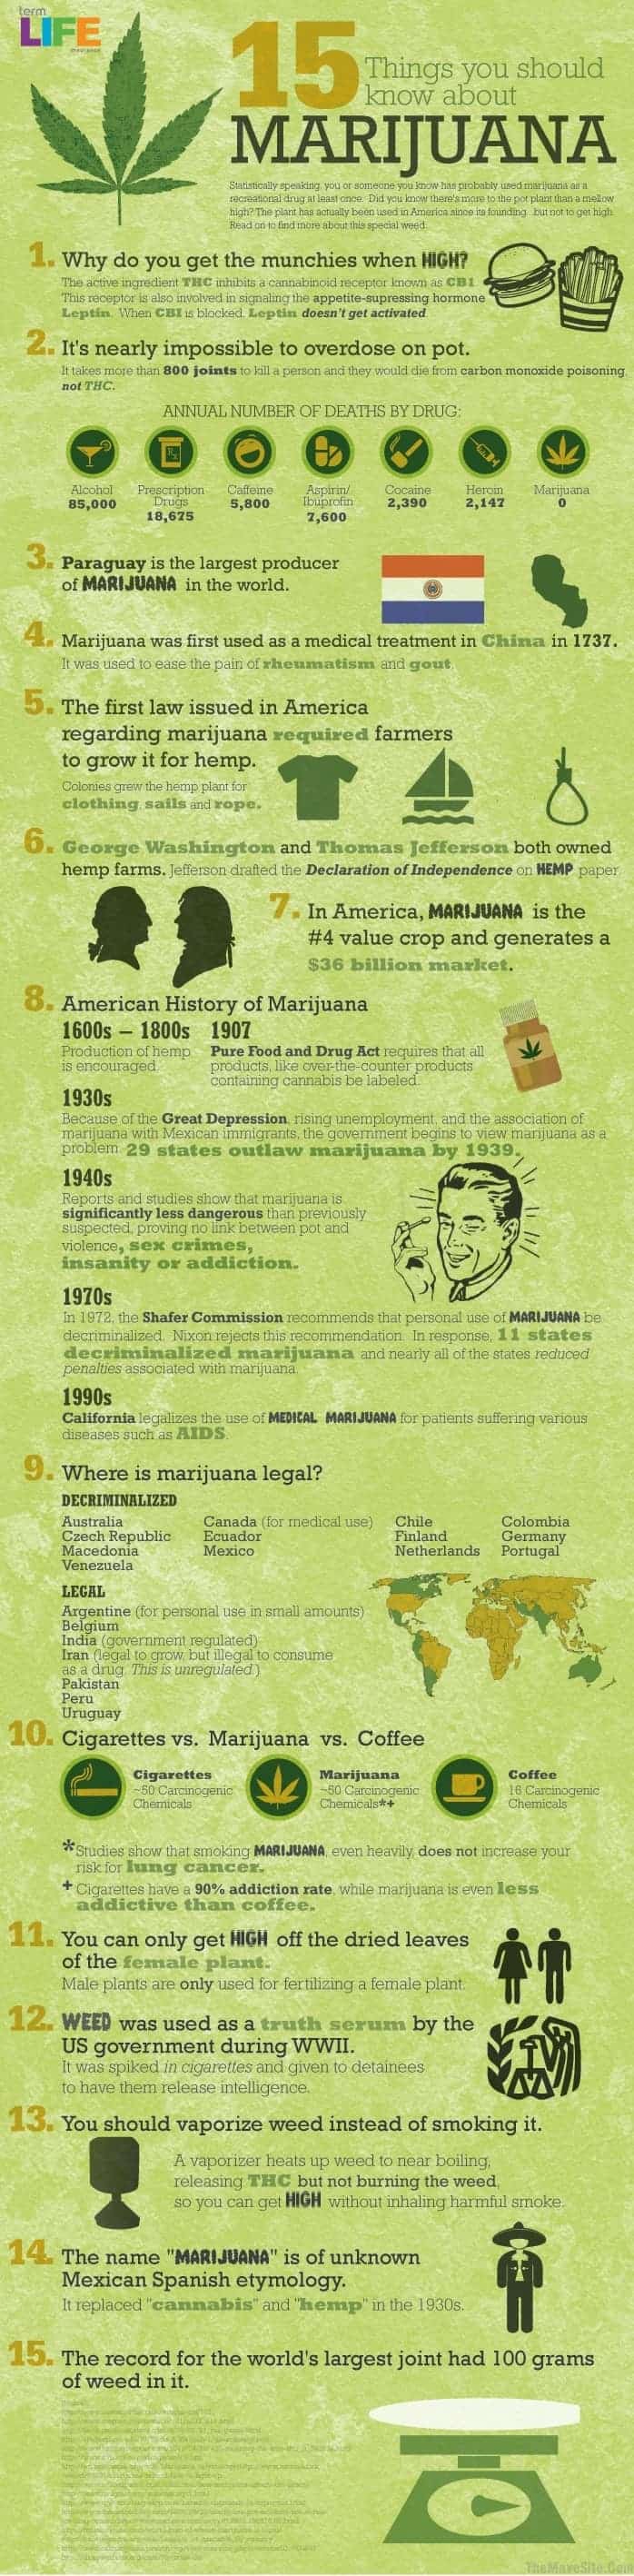 15 Things to Know About Marijuana